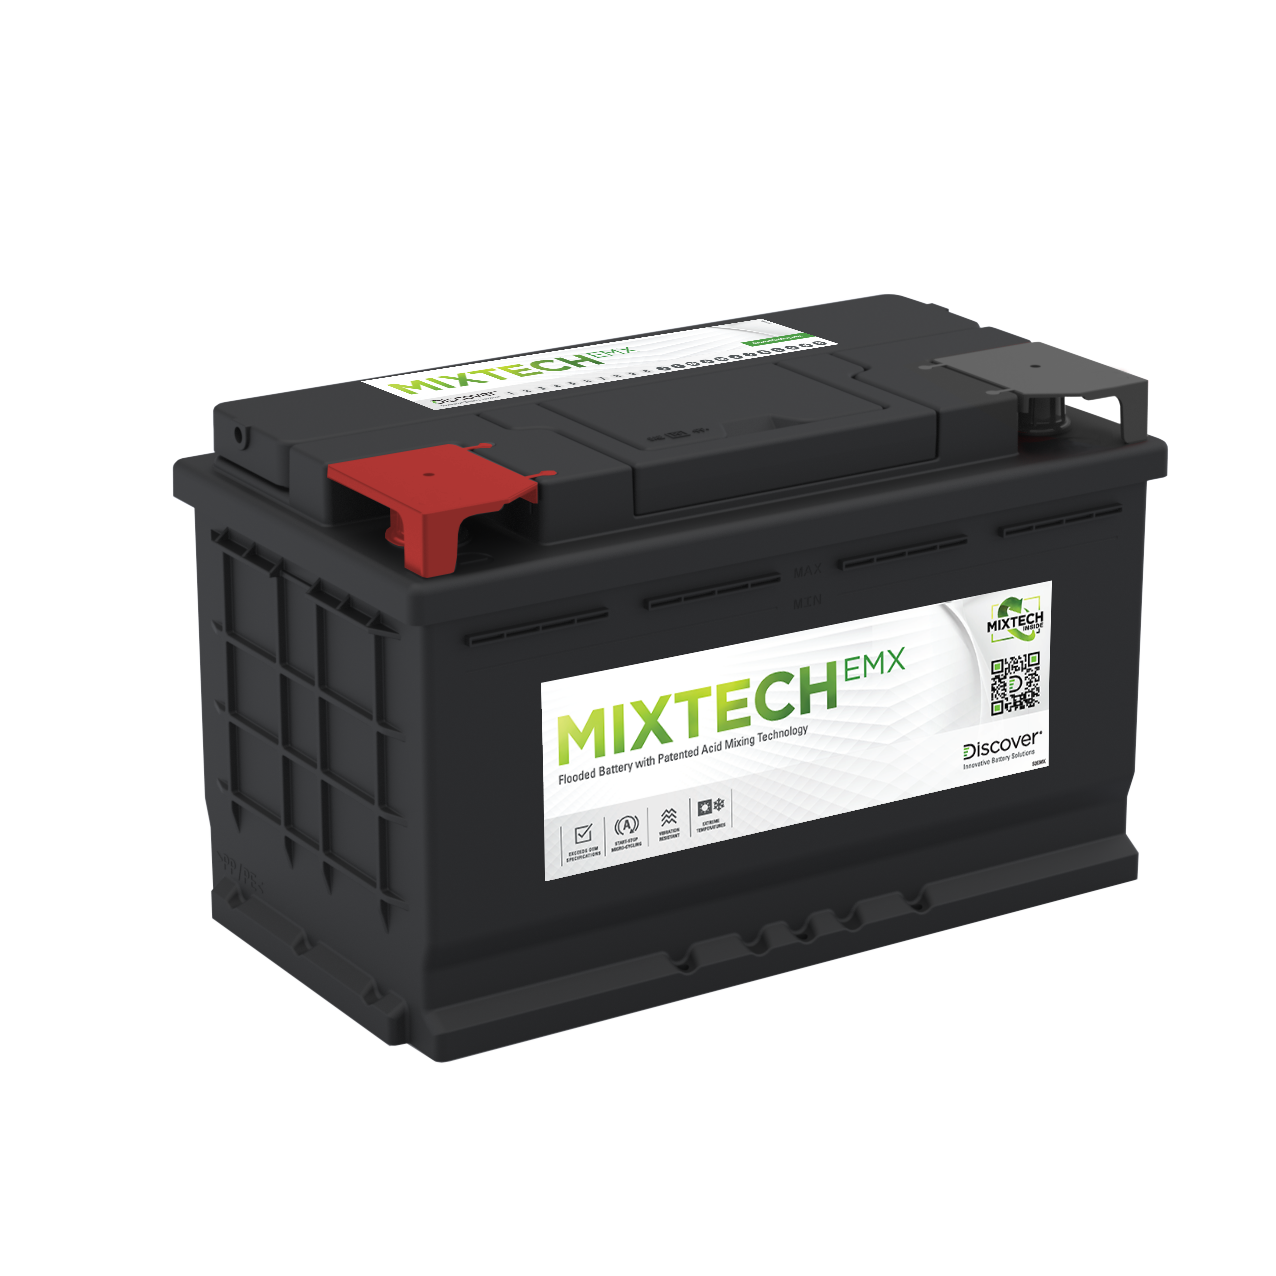 M637-EMX MIXTECH EMX Premium Flooded Starting Battery | Discover